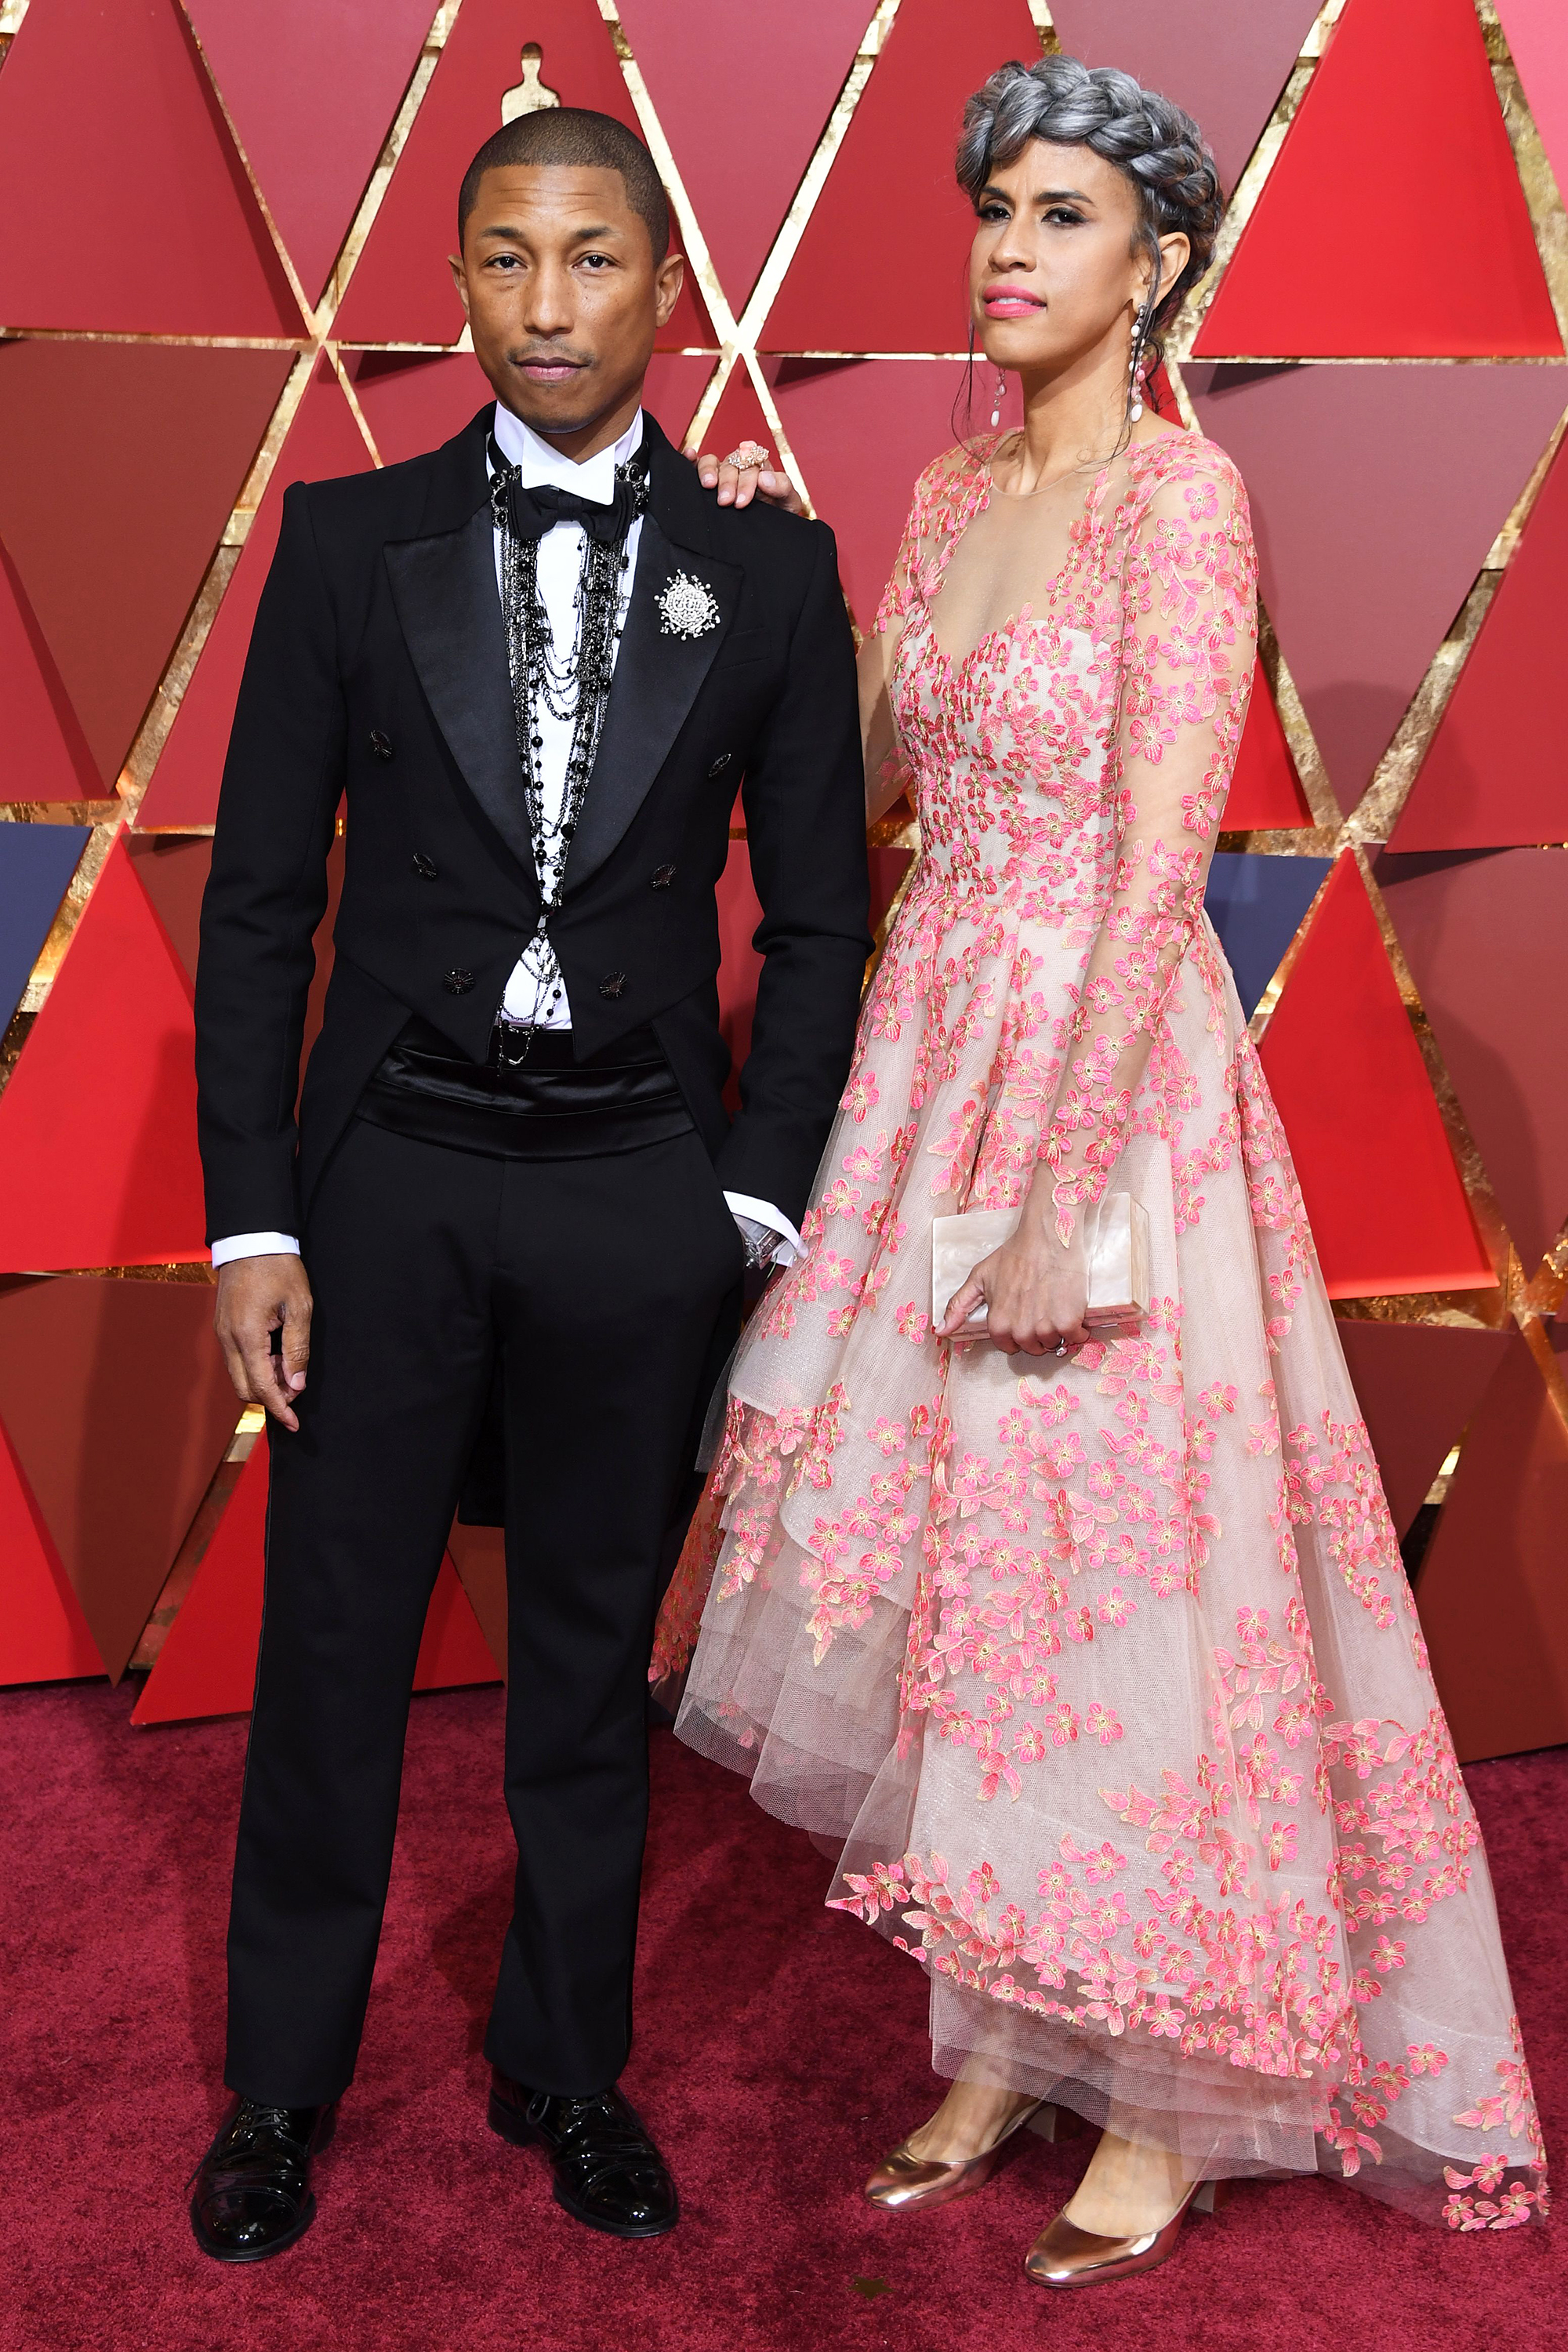 Pharrell Williams and Helen Lasichanh on the red carpet for the 89th Oscars, on Feb. 26, 2017 in Hollywood, Calif.